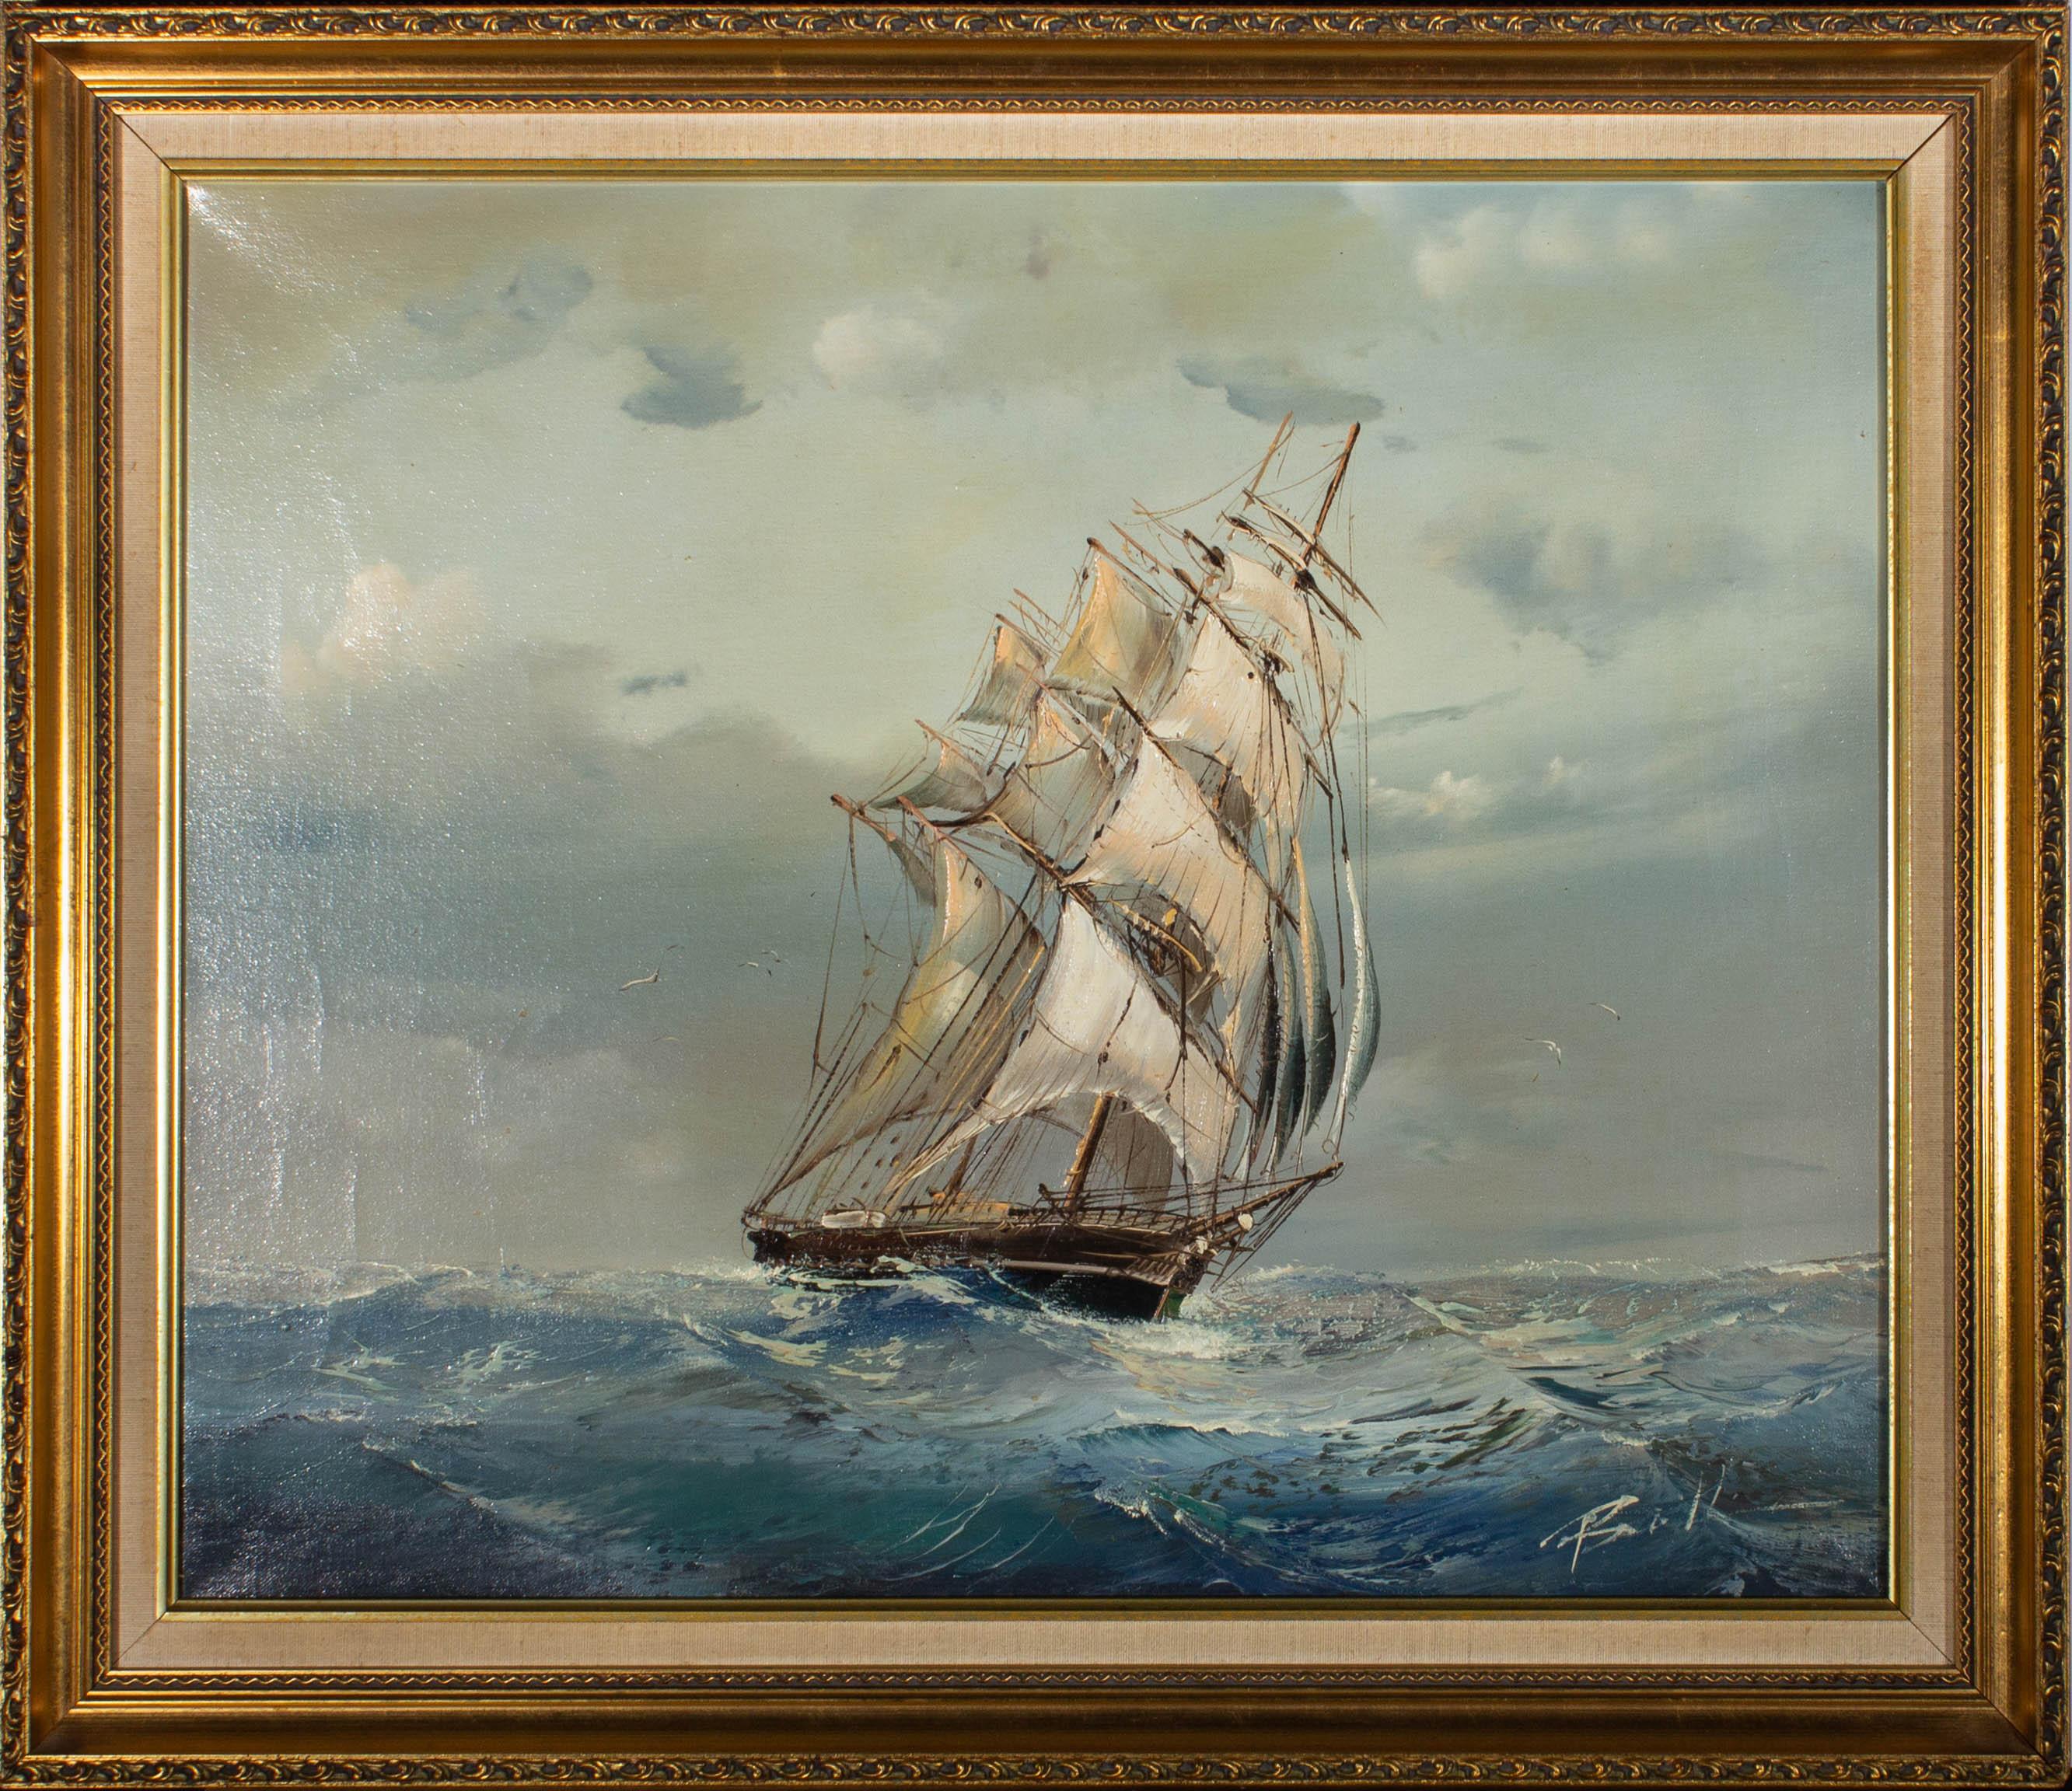 A view of a frigate traversing choppy seas. Presented in a gilt-effect wooden frame with a linen slip and gilt-effect inner edge. Signed to the lower-right edge. On canvas on stretchers.
